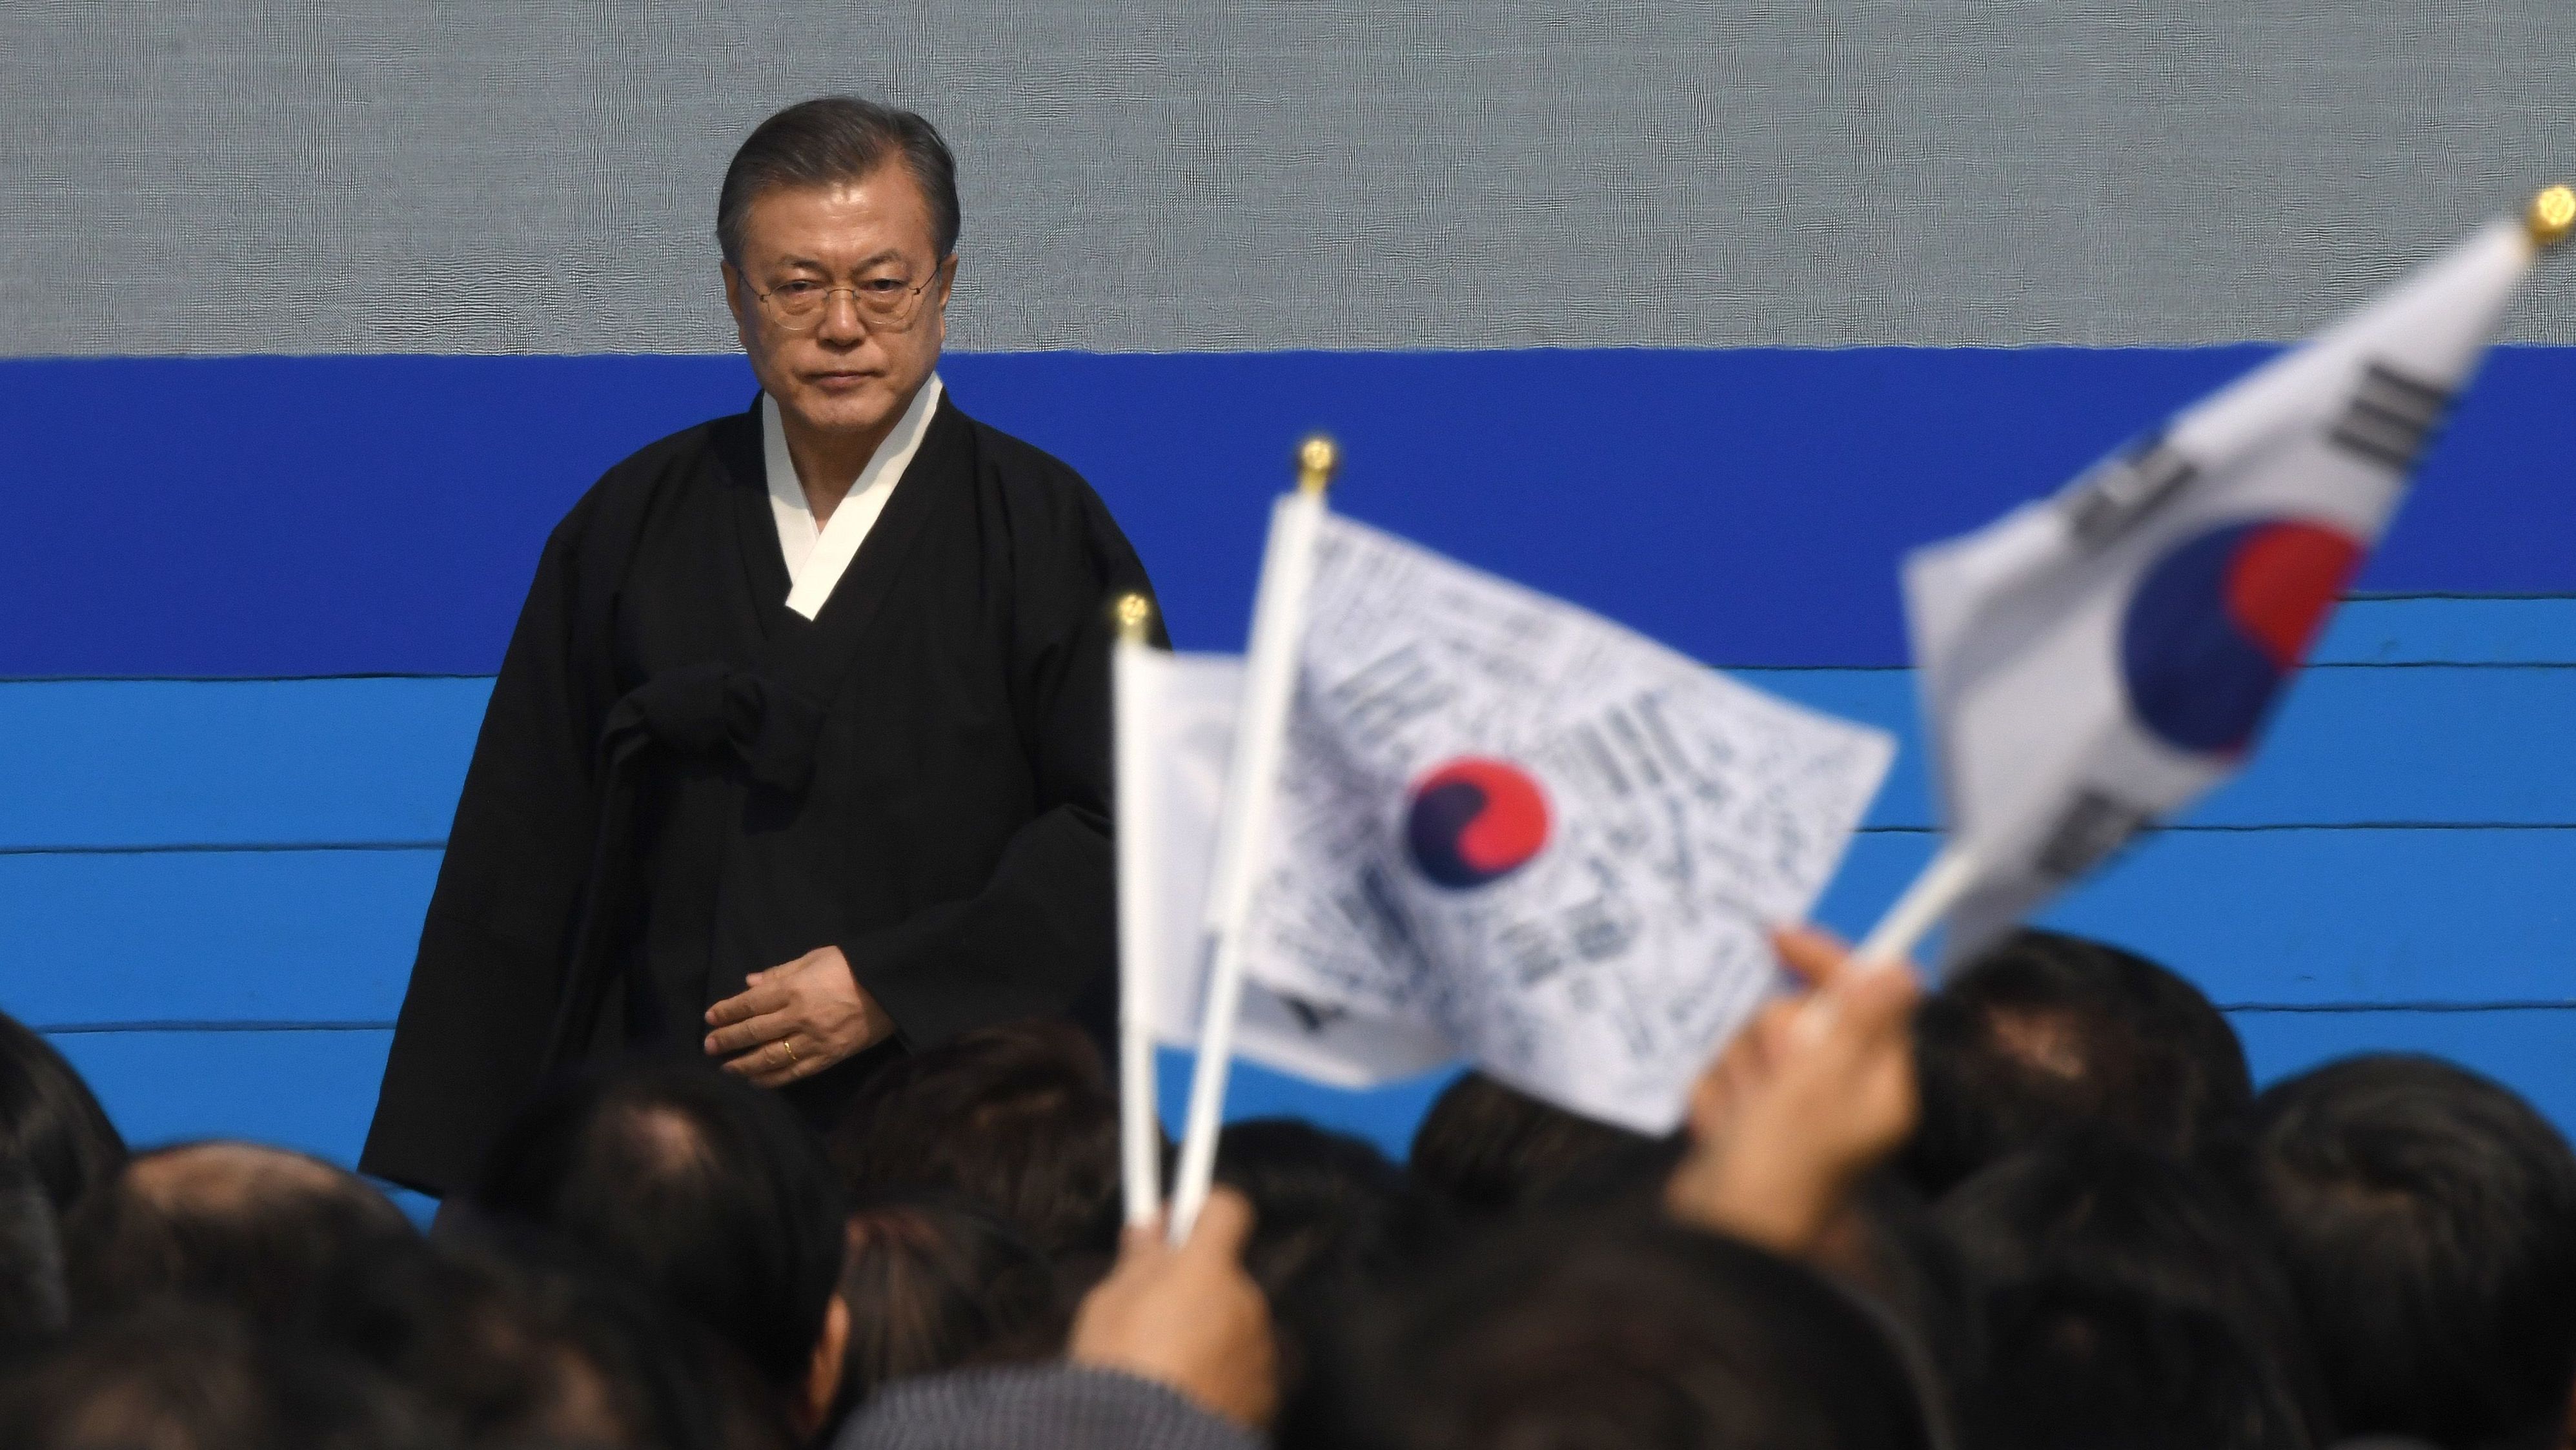 "Cruel treatment and abuse on athletes are legacies from old times that cannot be justified with any word," said President Moon Jae-in. 